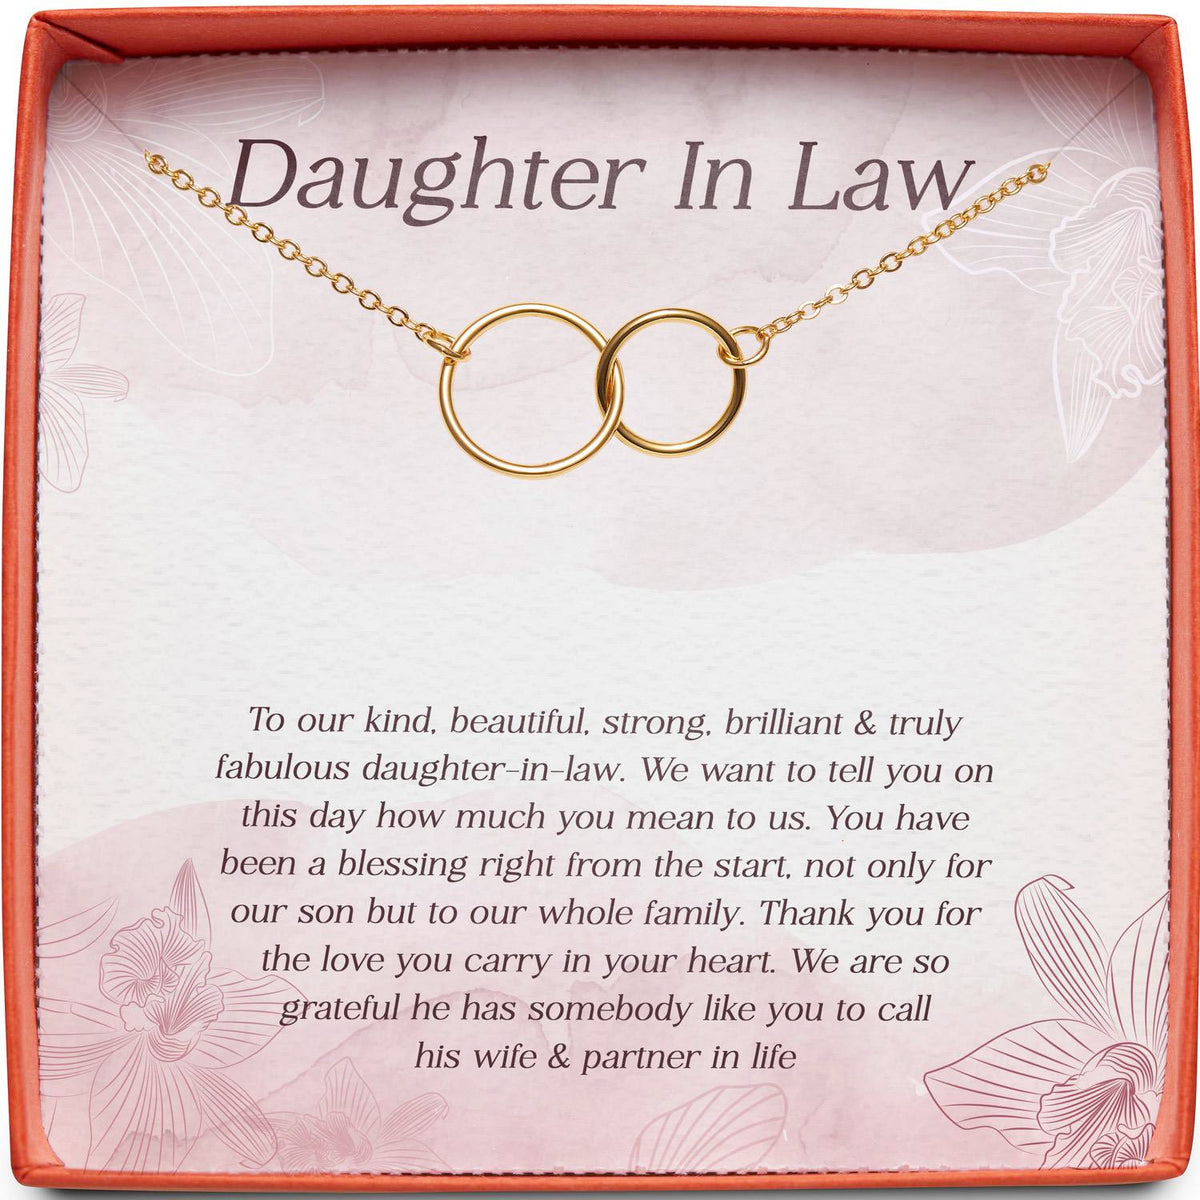 Daughter In Law | Kind, Beautiful, Strong, Brilliant | Interlocking Circles